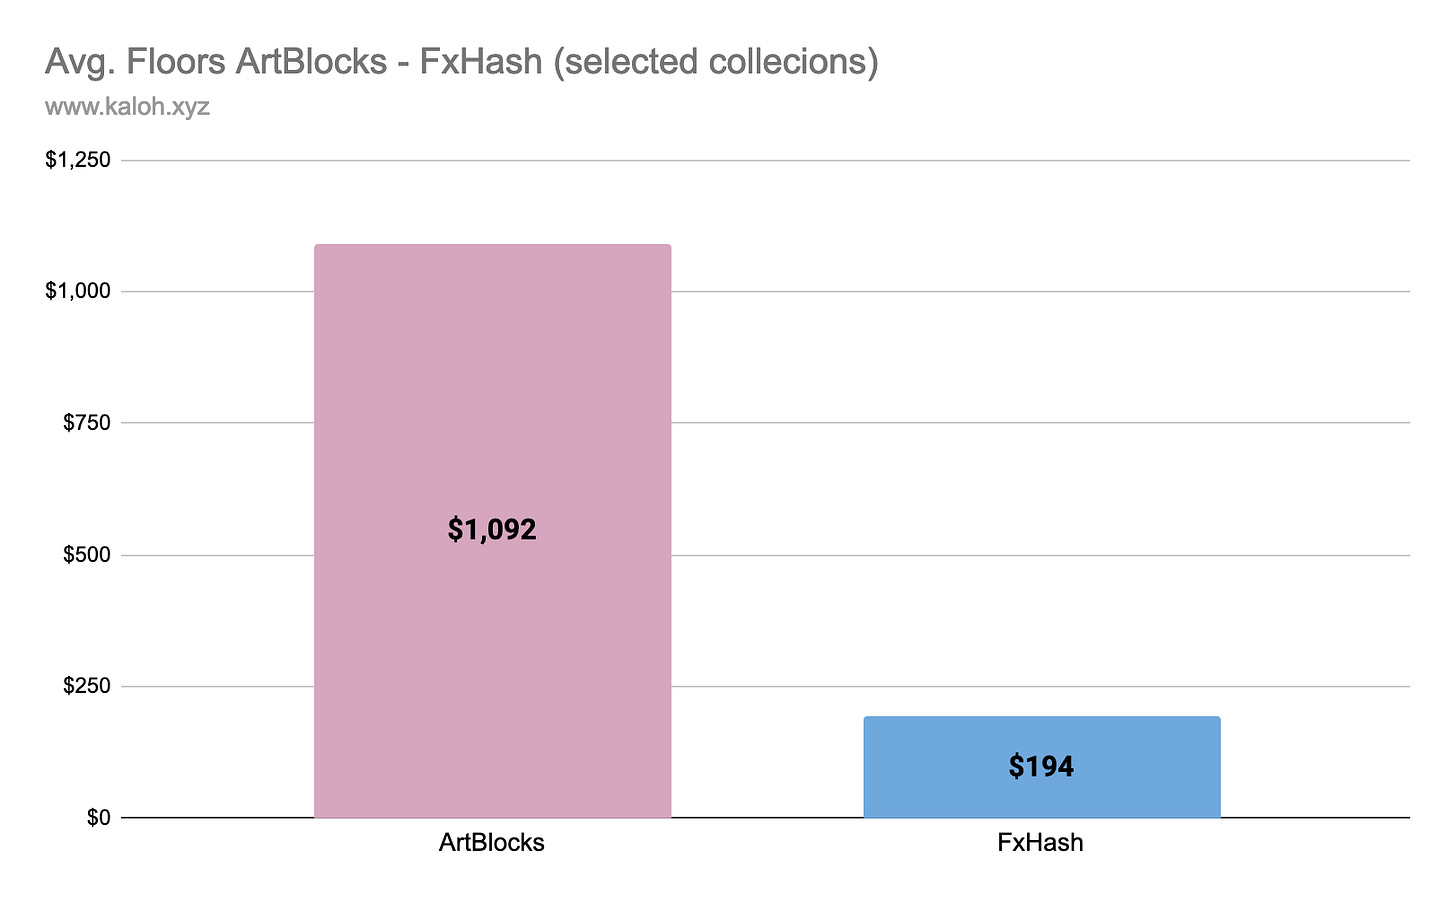 The average floors are almost x10 higher on ArtBlocks (on the selected collections